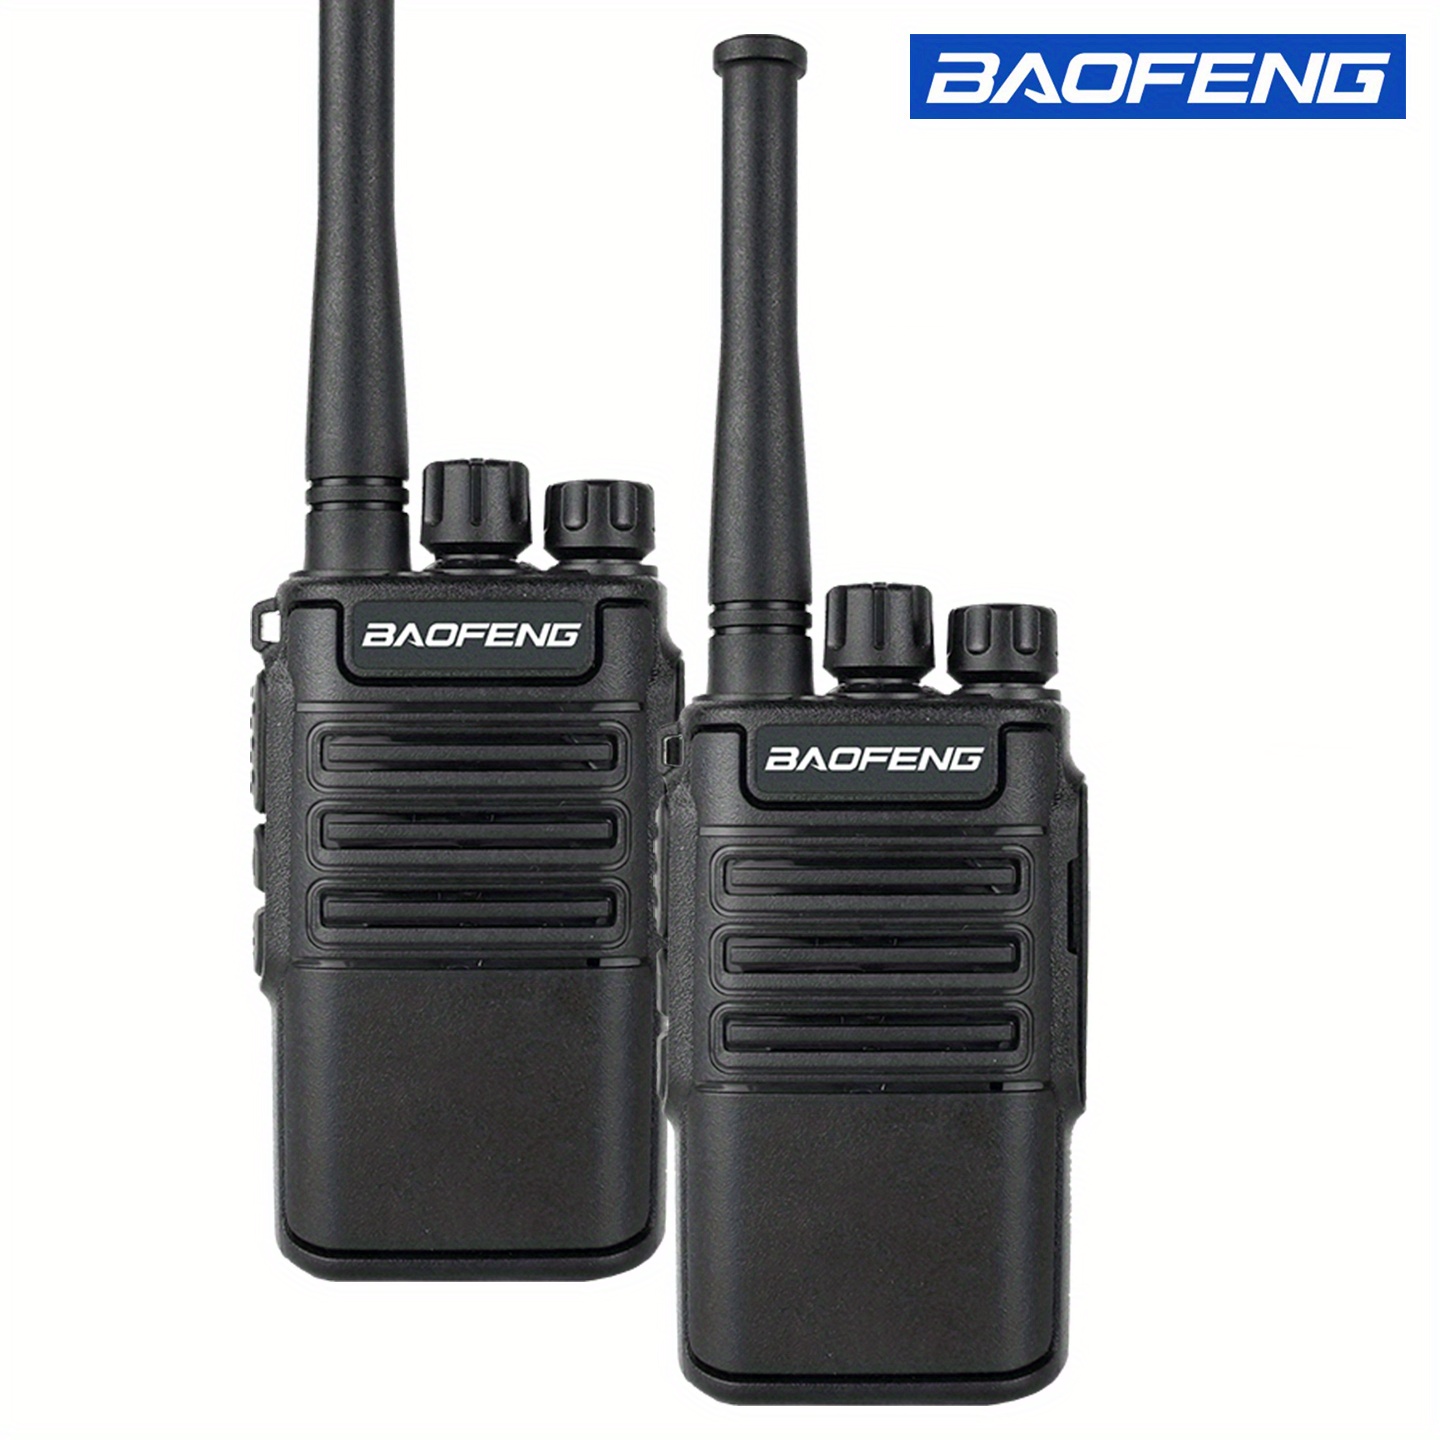 Arcshell Rechargeable Long Range Two-Way Radios with Earpiece Pack Walkie Talkies Li-ion Battery and Charger Included - 2